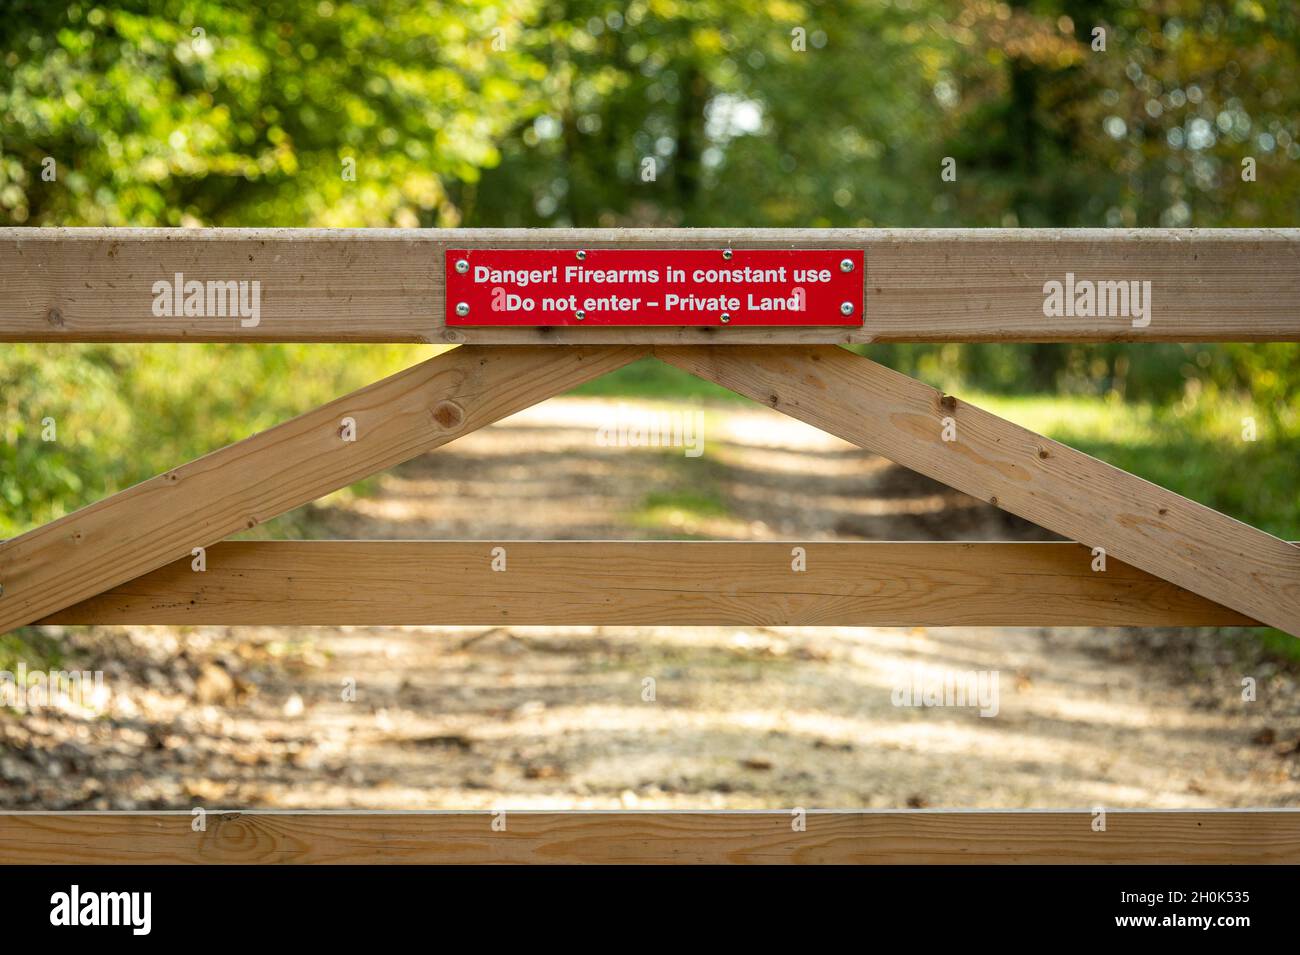 'Danger Firearms in constant use. Do not Enter, Private Land', sign on a wooden gate in the countryside. Stock Photo